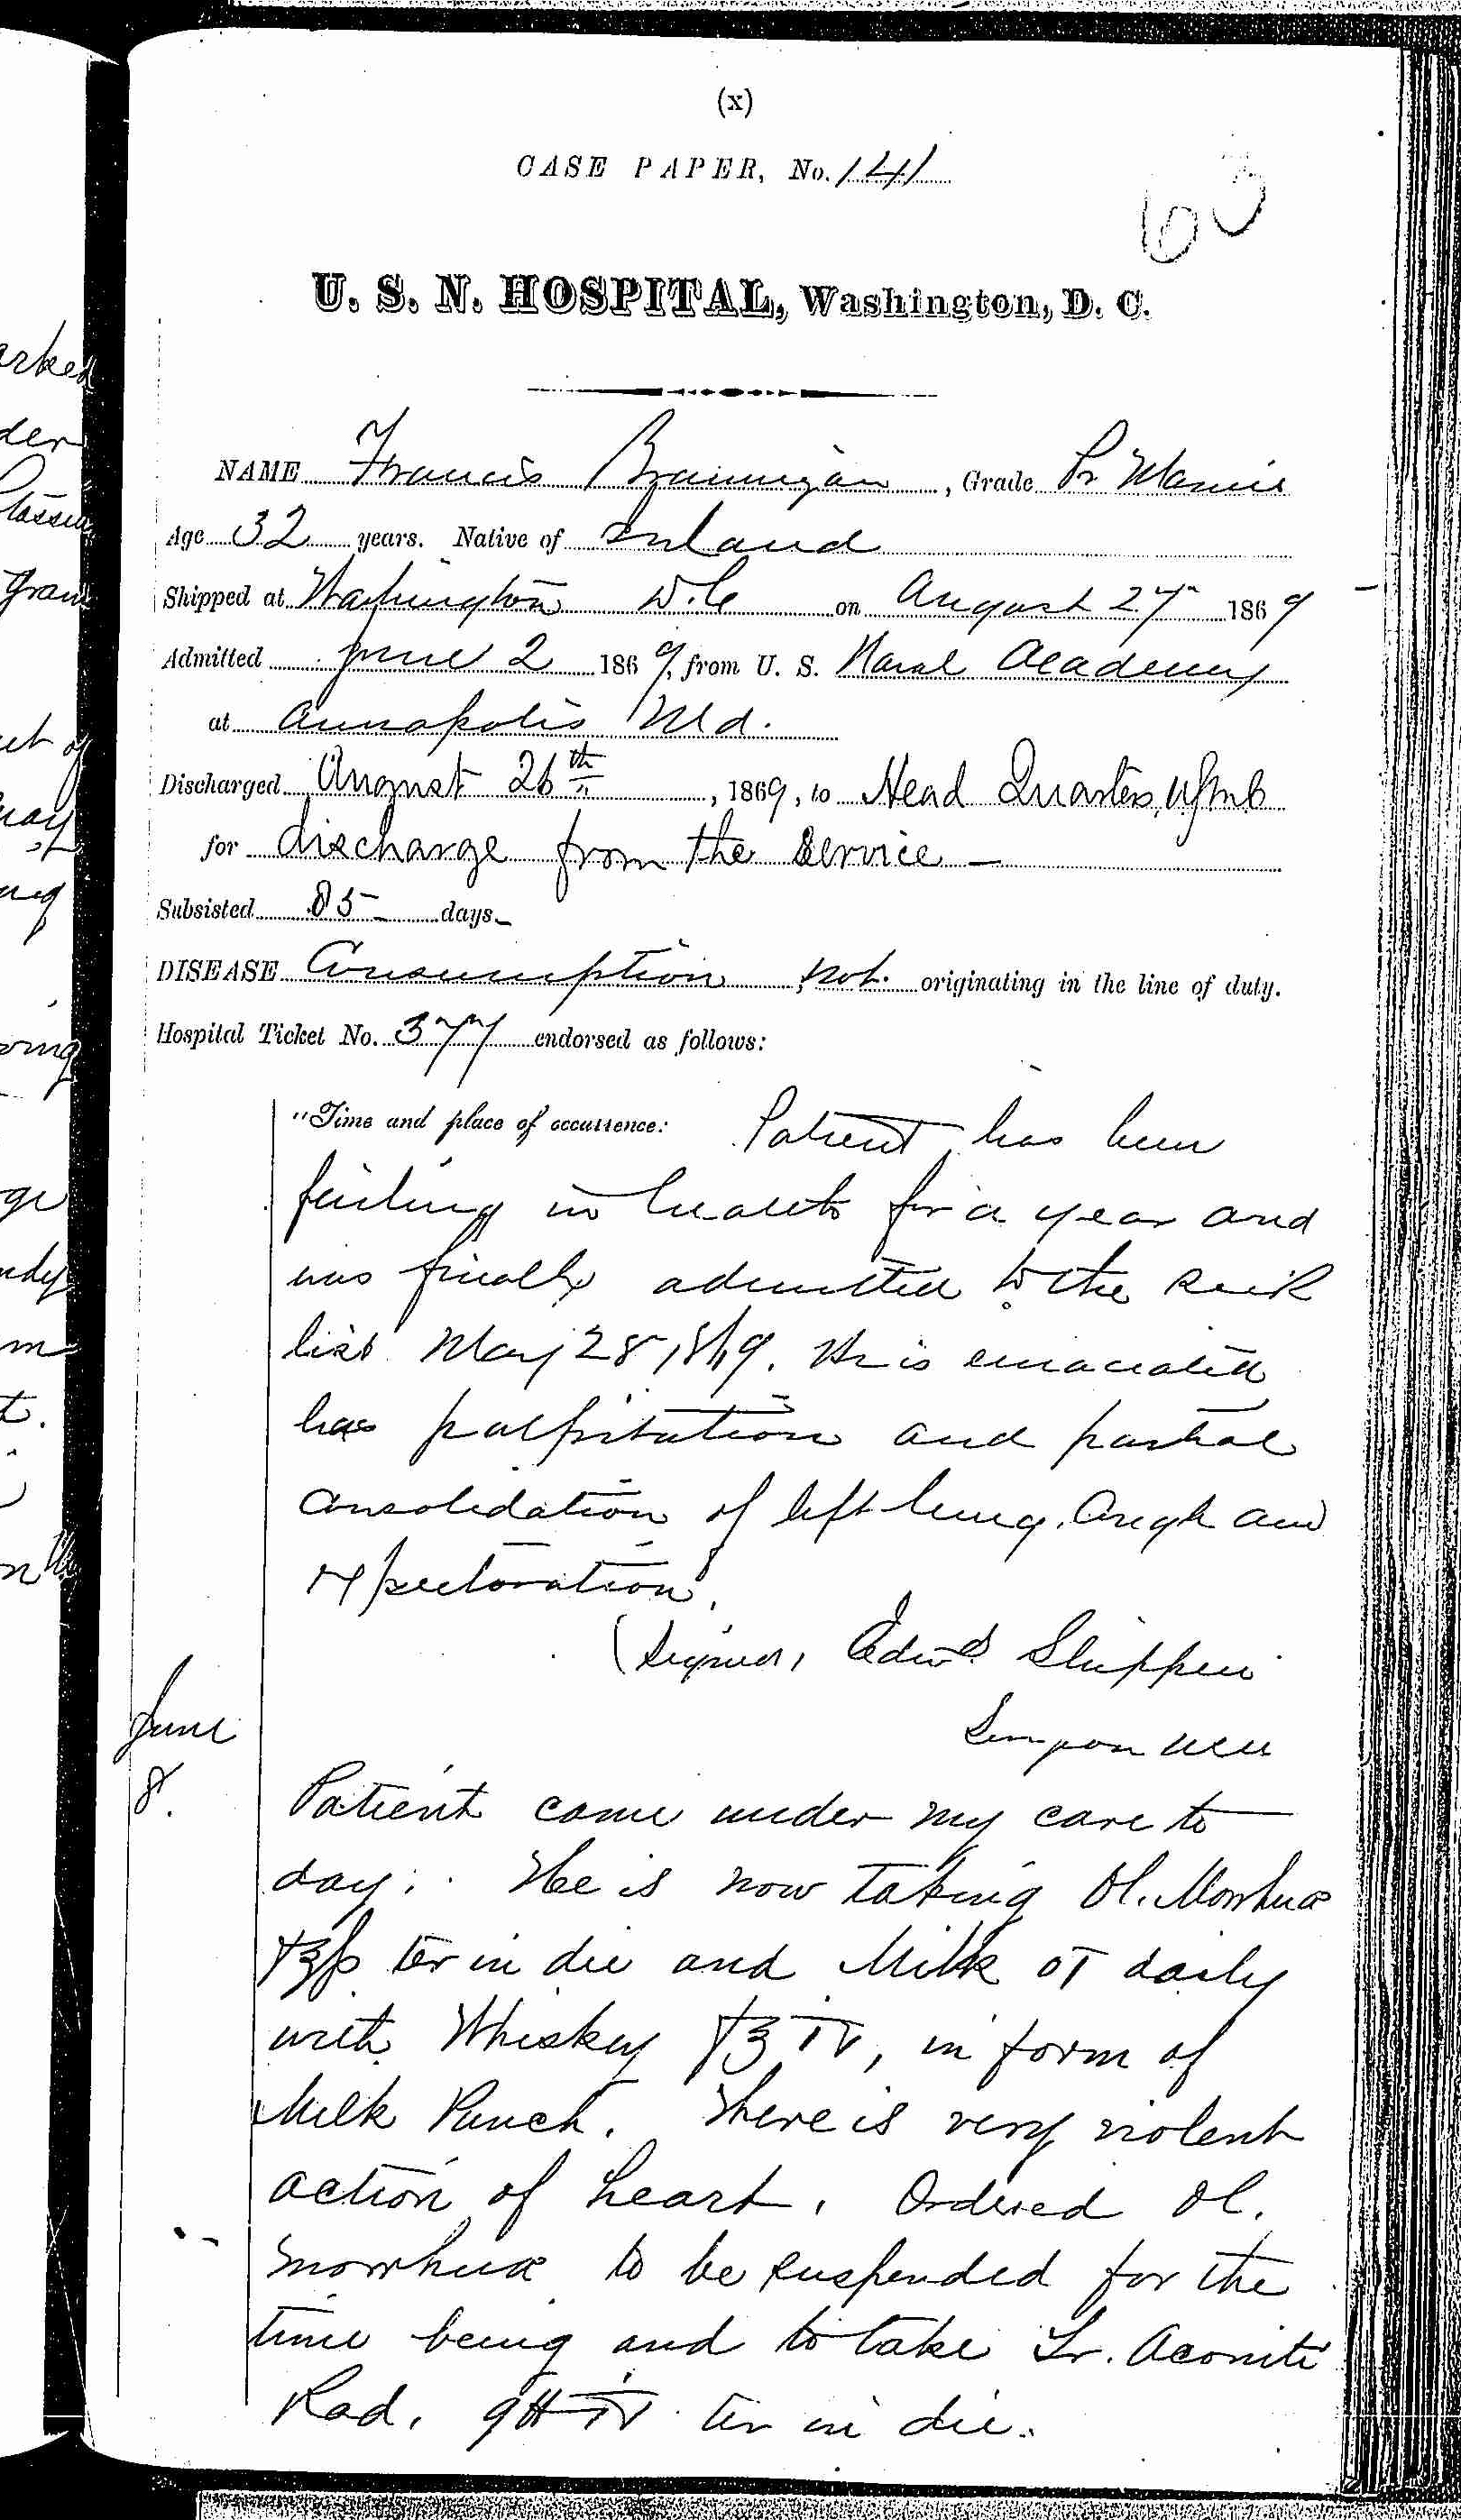 Entry for Francis Brannigan (page 1 of 6) in the log Hospital Tickets and Case Papers - Naval Hospital - Washington, D.C. - 1868-69